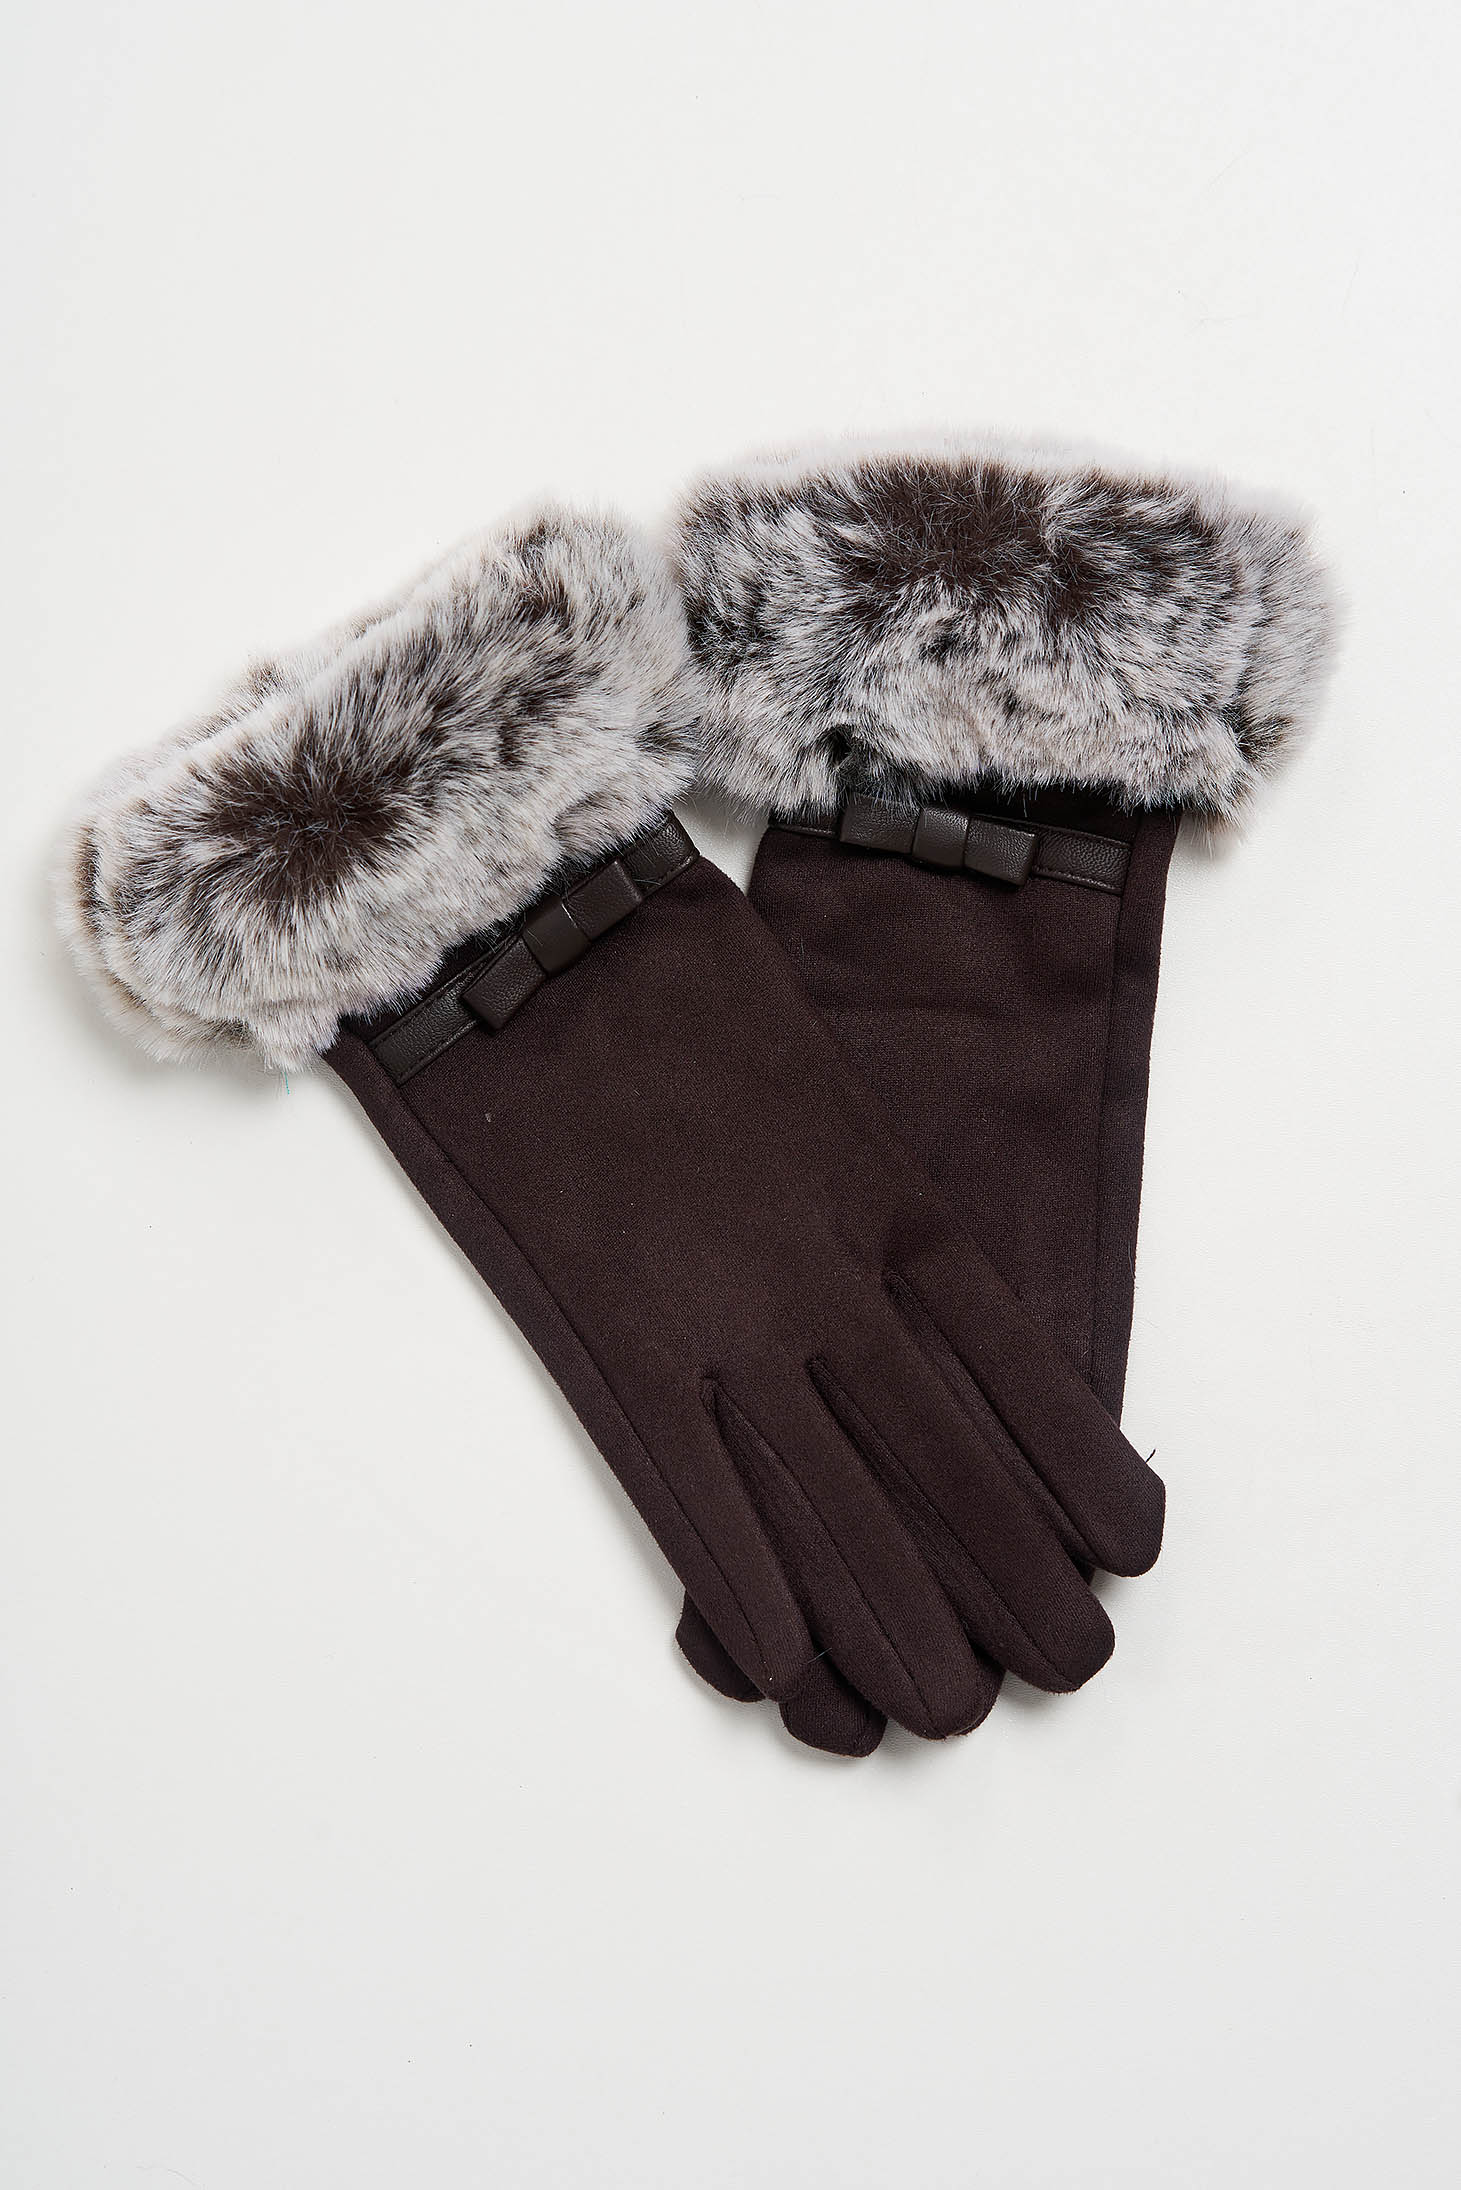 Burgundy gloves from ecological leather with faux fur accessory